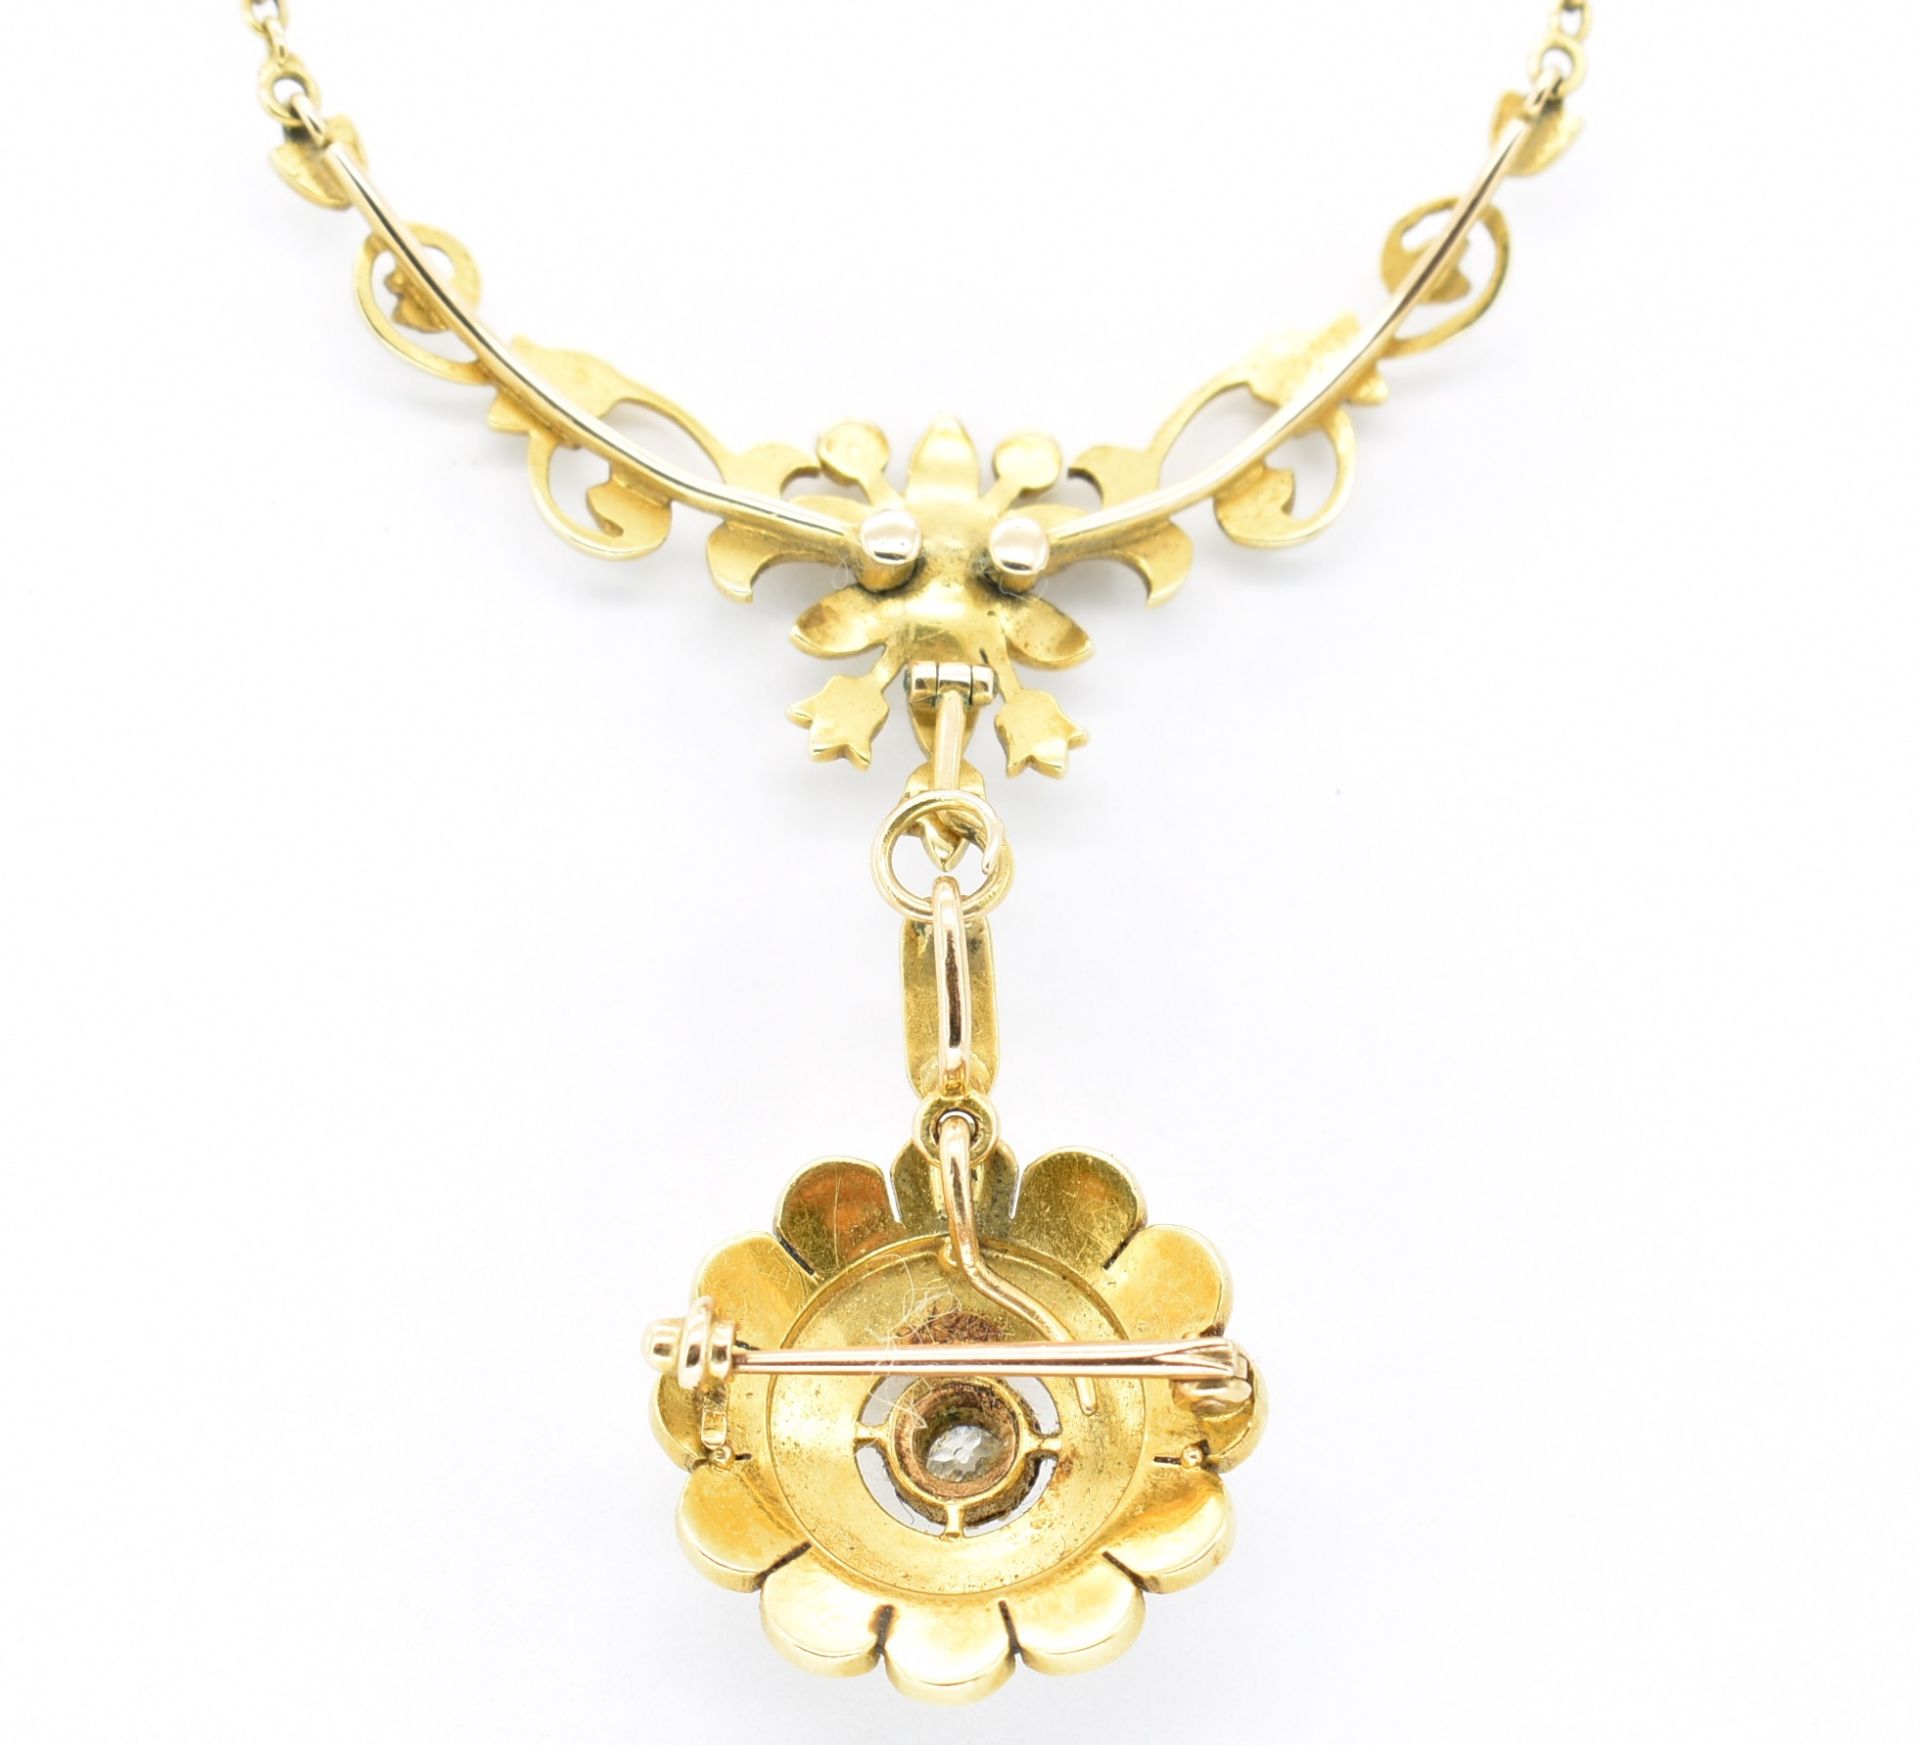 15CT GOLD PEARL & DIAMOND SWAG PENDANT NECKLACE - Image 3 of 8